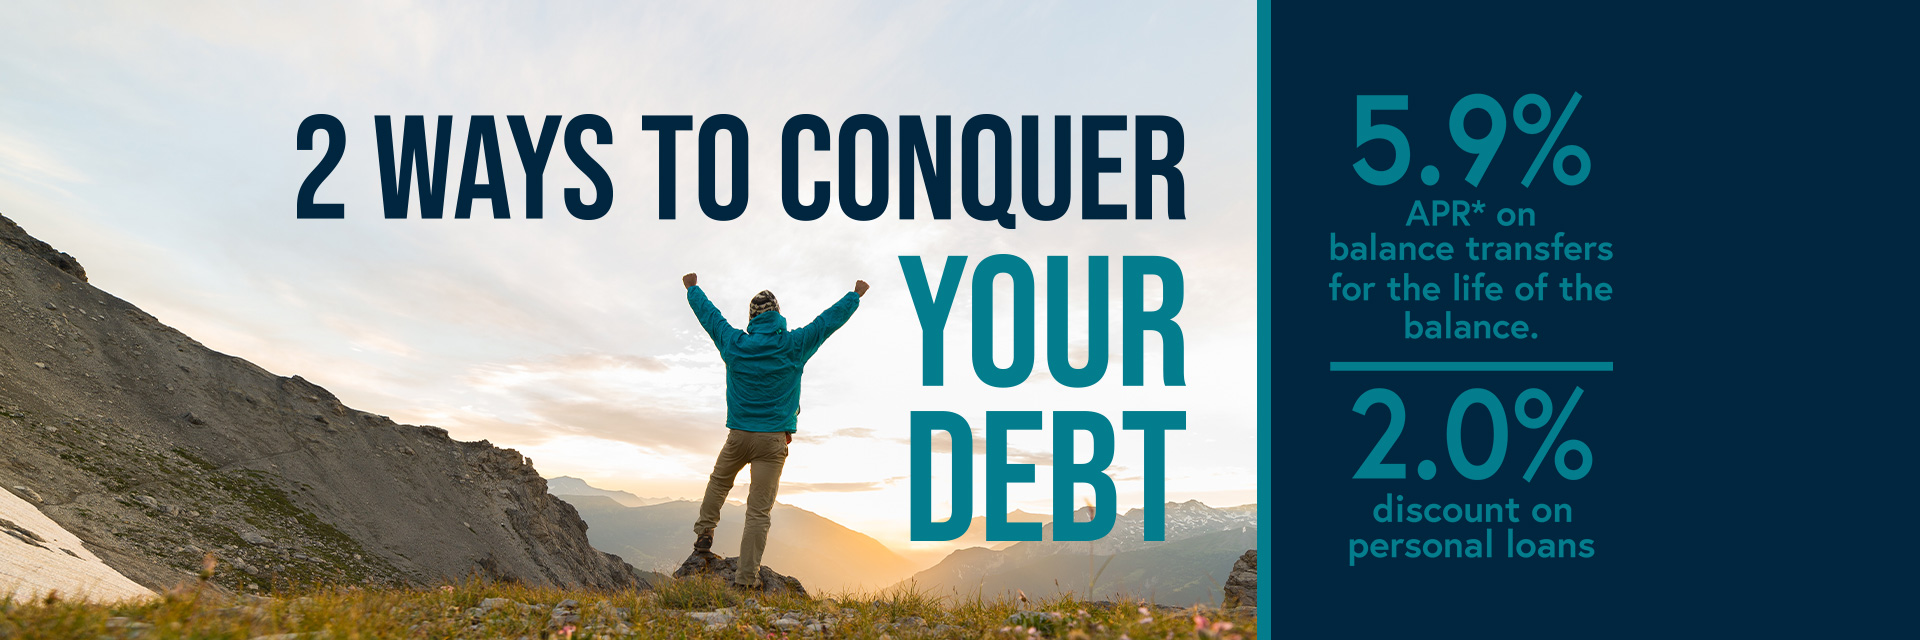 2 ways to conquer your debt